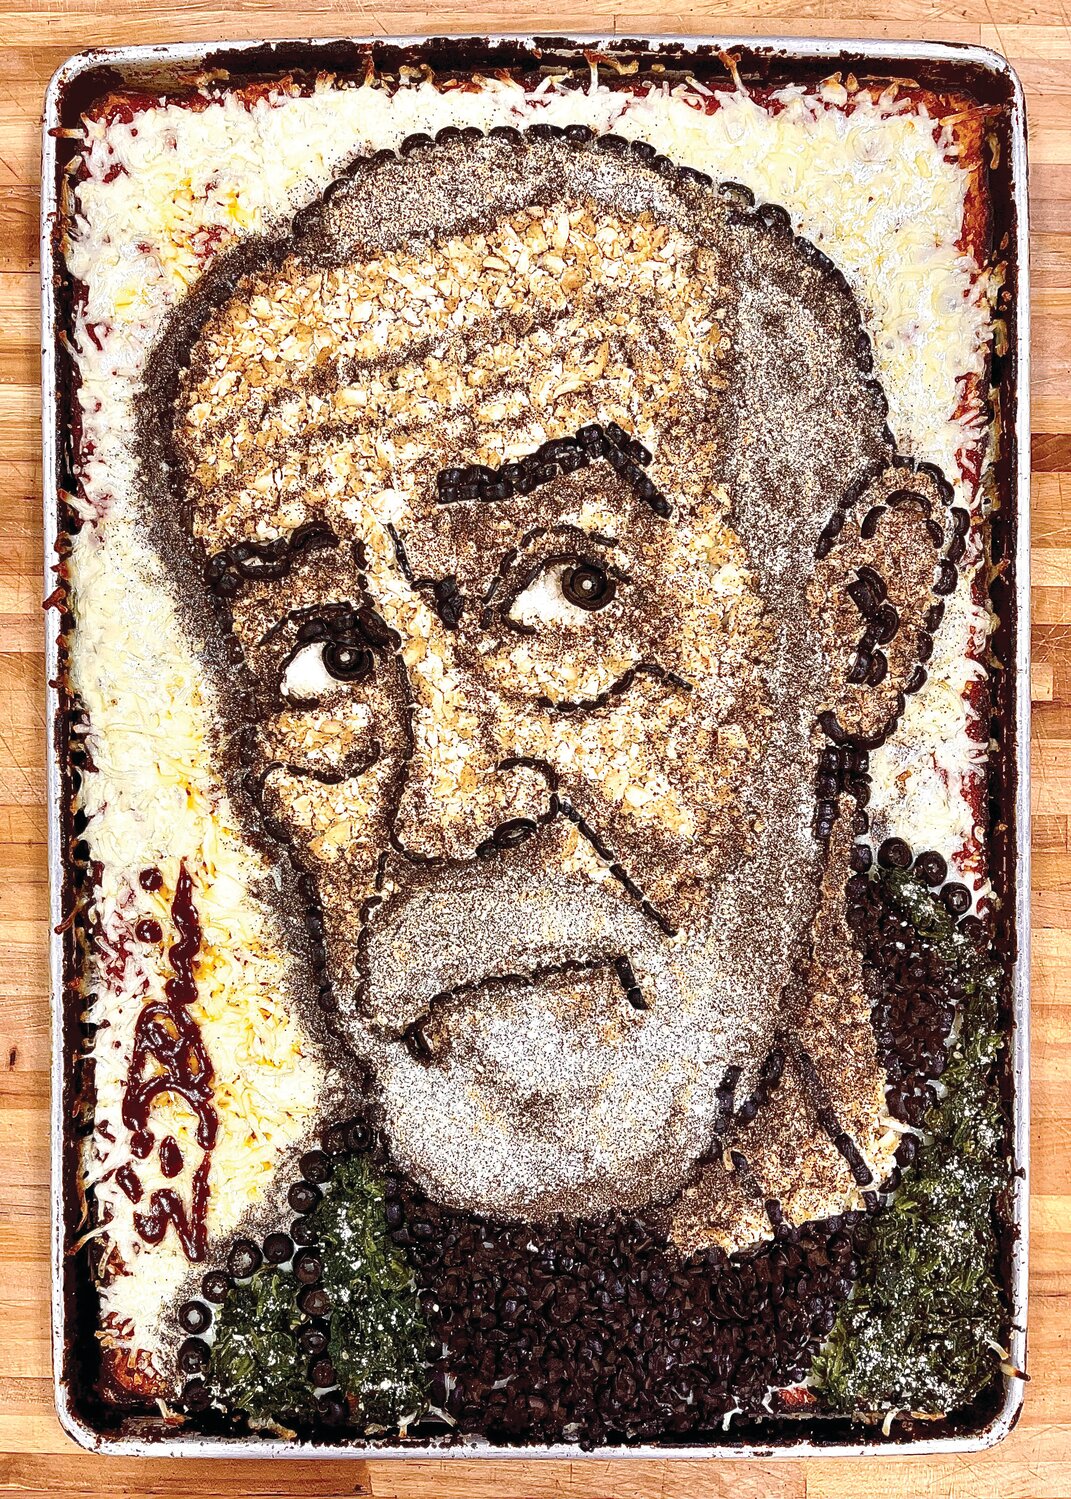 PIZZA ART: Eric Palmieri crafts portraits with pizza. He’s tackled an array of subjects from action star Sylvester Stallone to late comedian George Carlin, to pizza reviewer and Barstool Sports magnate Dave Portnoy.